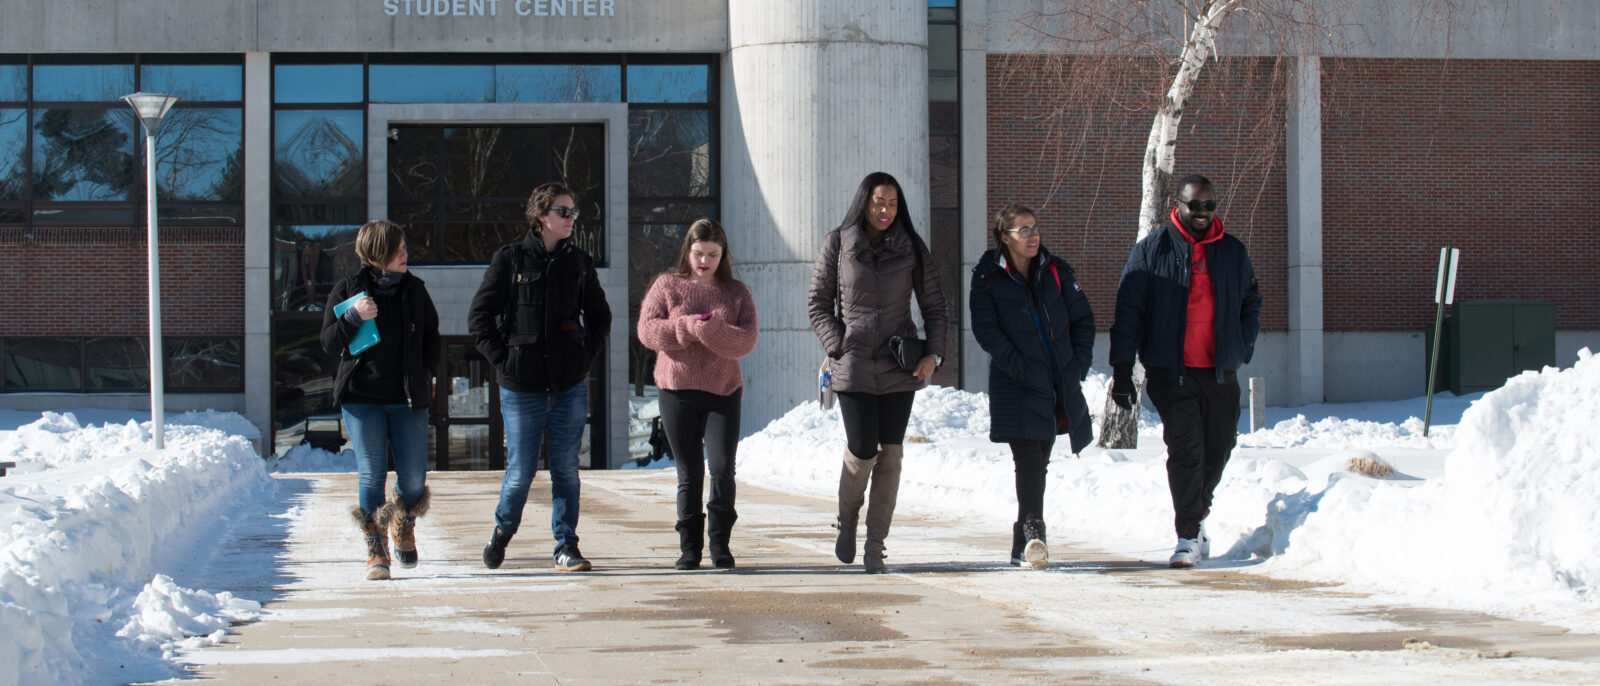 A photo of a group of students walking outside on the Haverhill campus, wearing winter jackets, walking with snow banks all around them through a cleared path